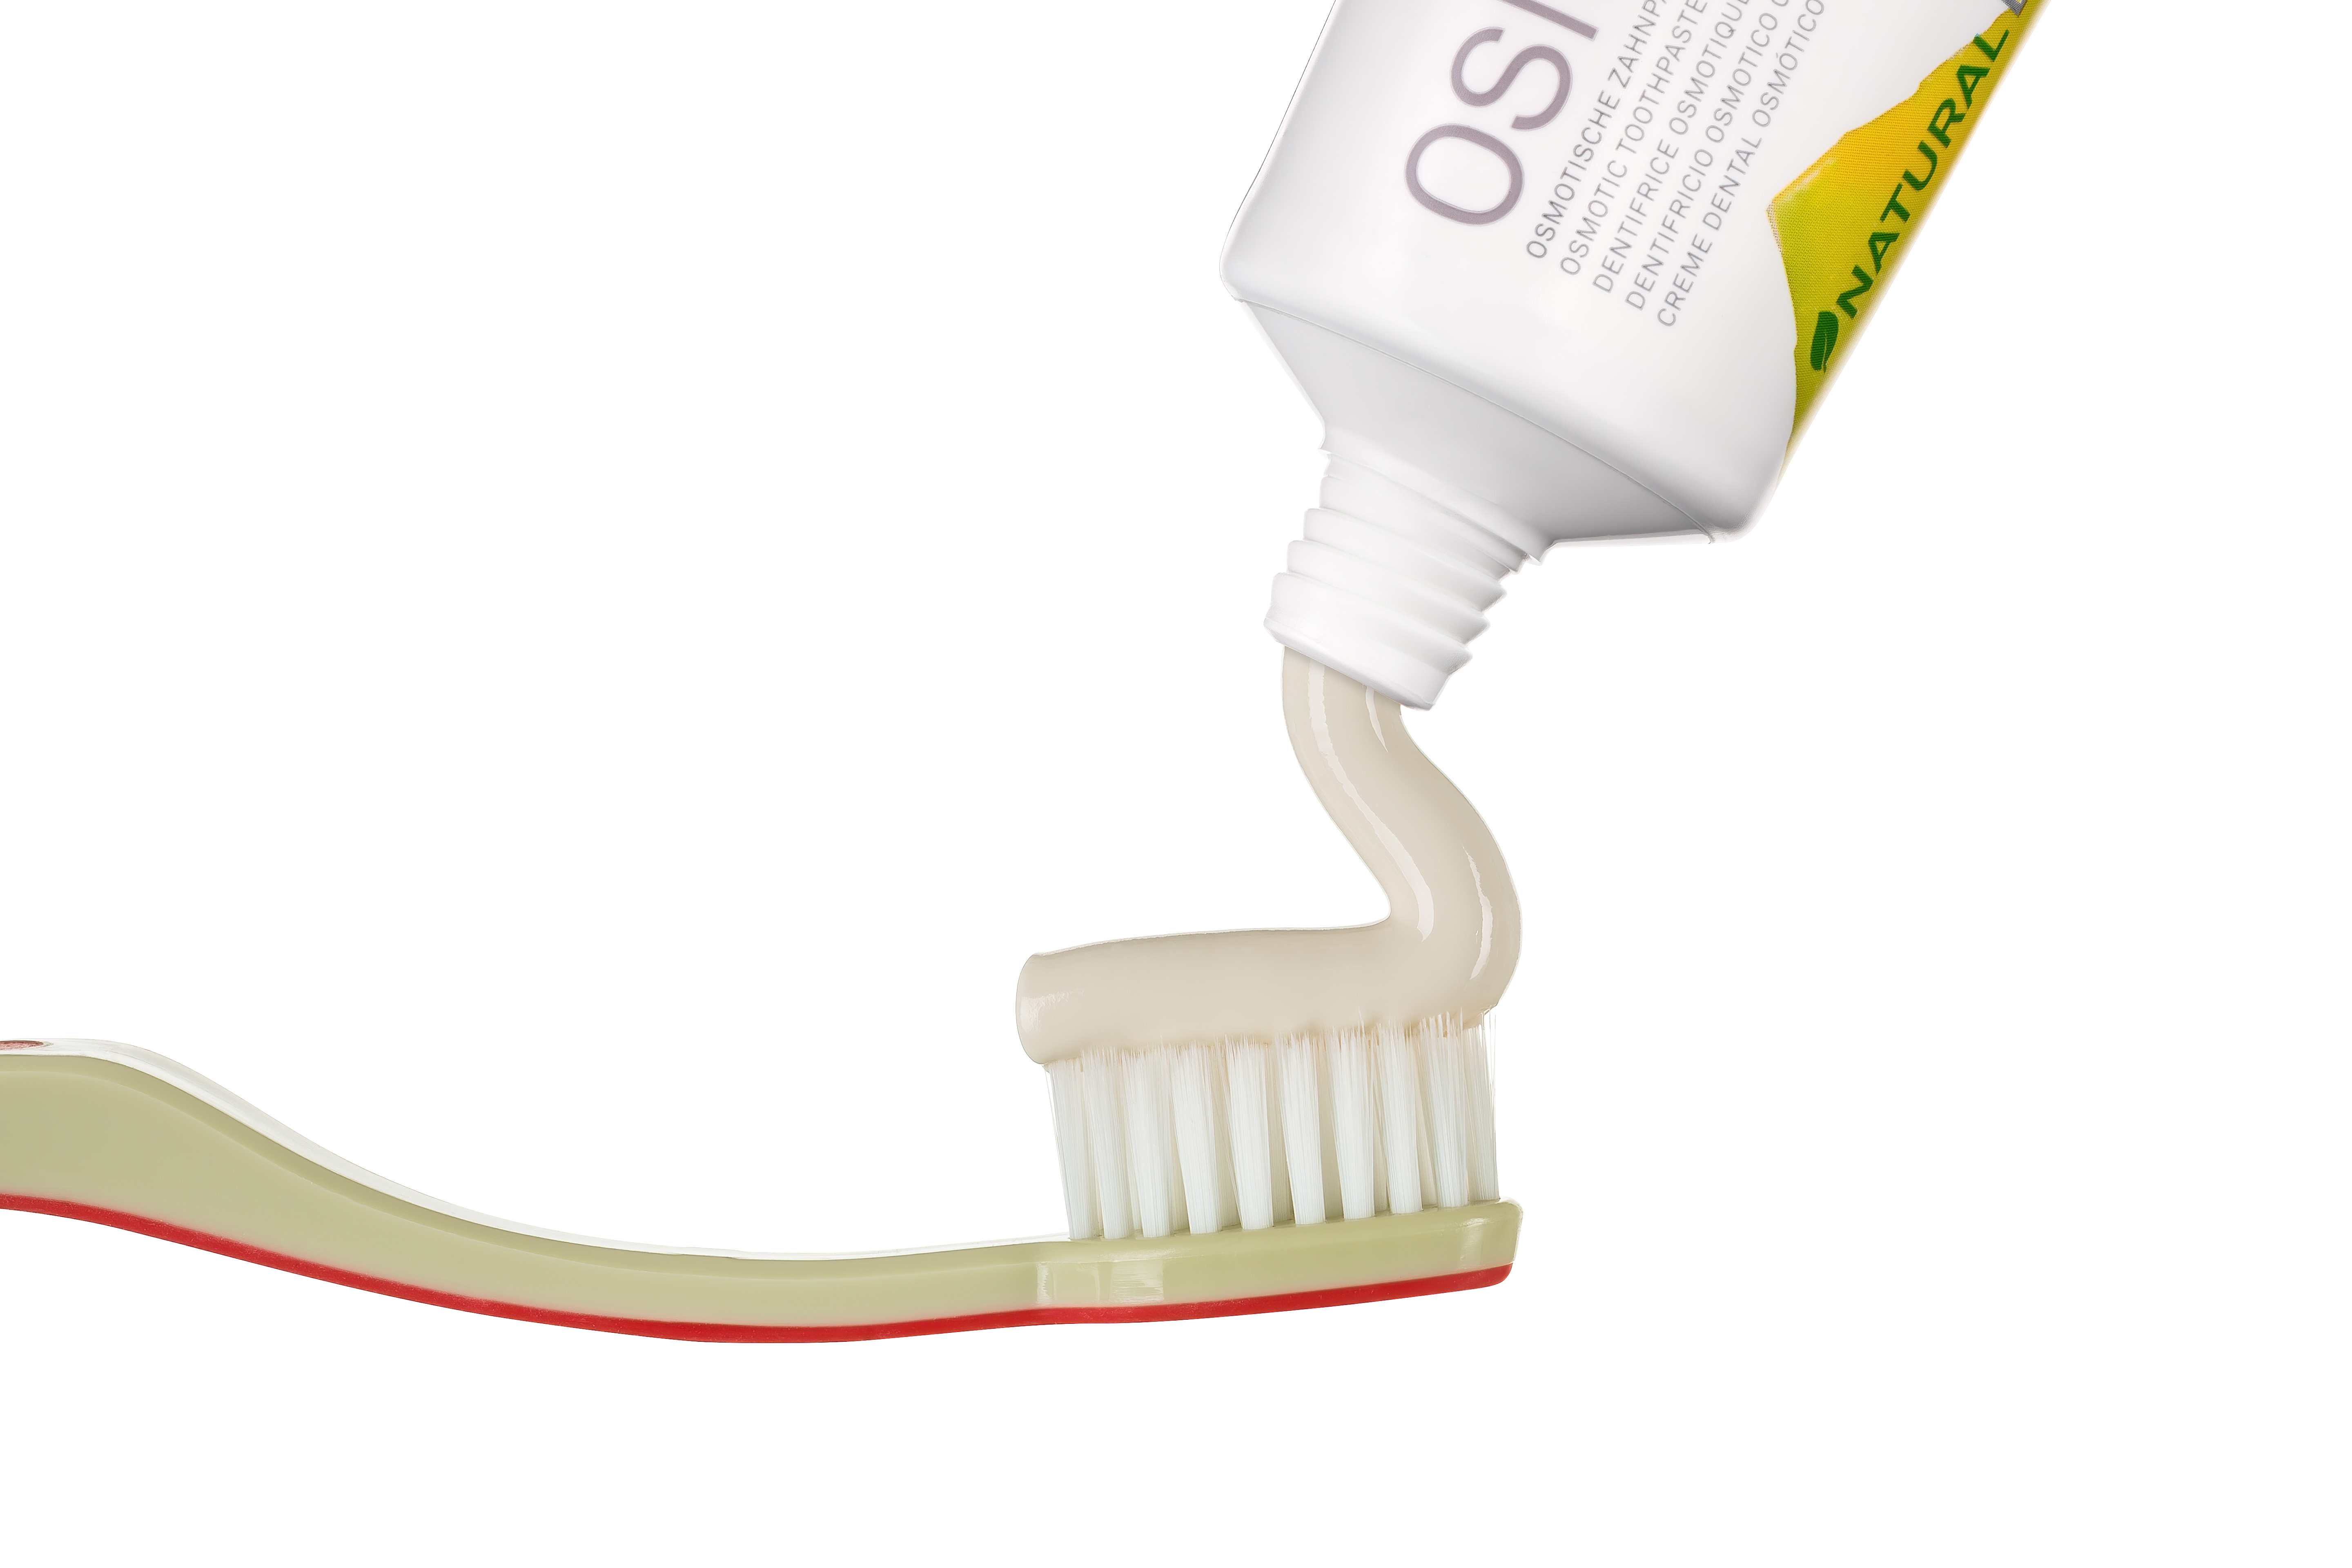 edel white osmotic toothpaste with ultrasoft toothbrush